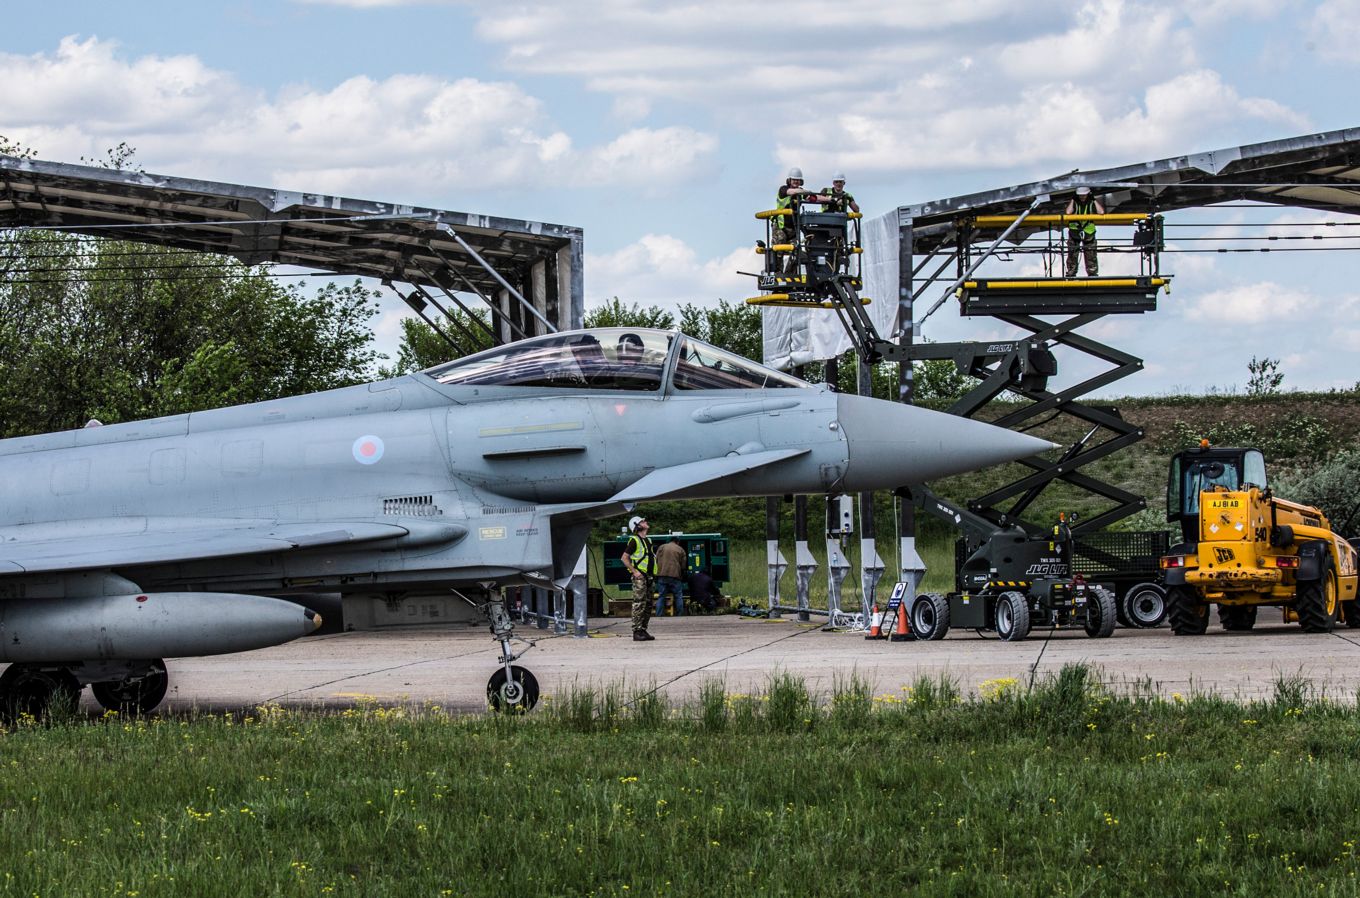 5001 Squadron at work in Romania last year